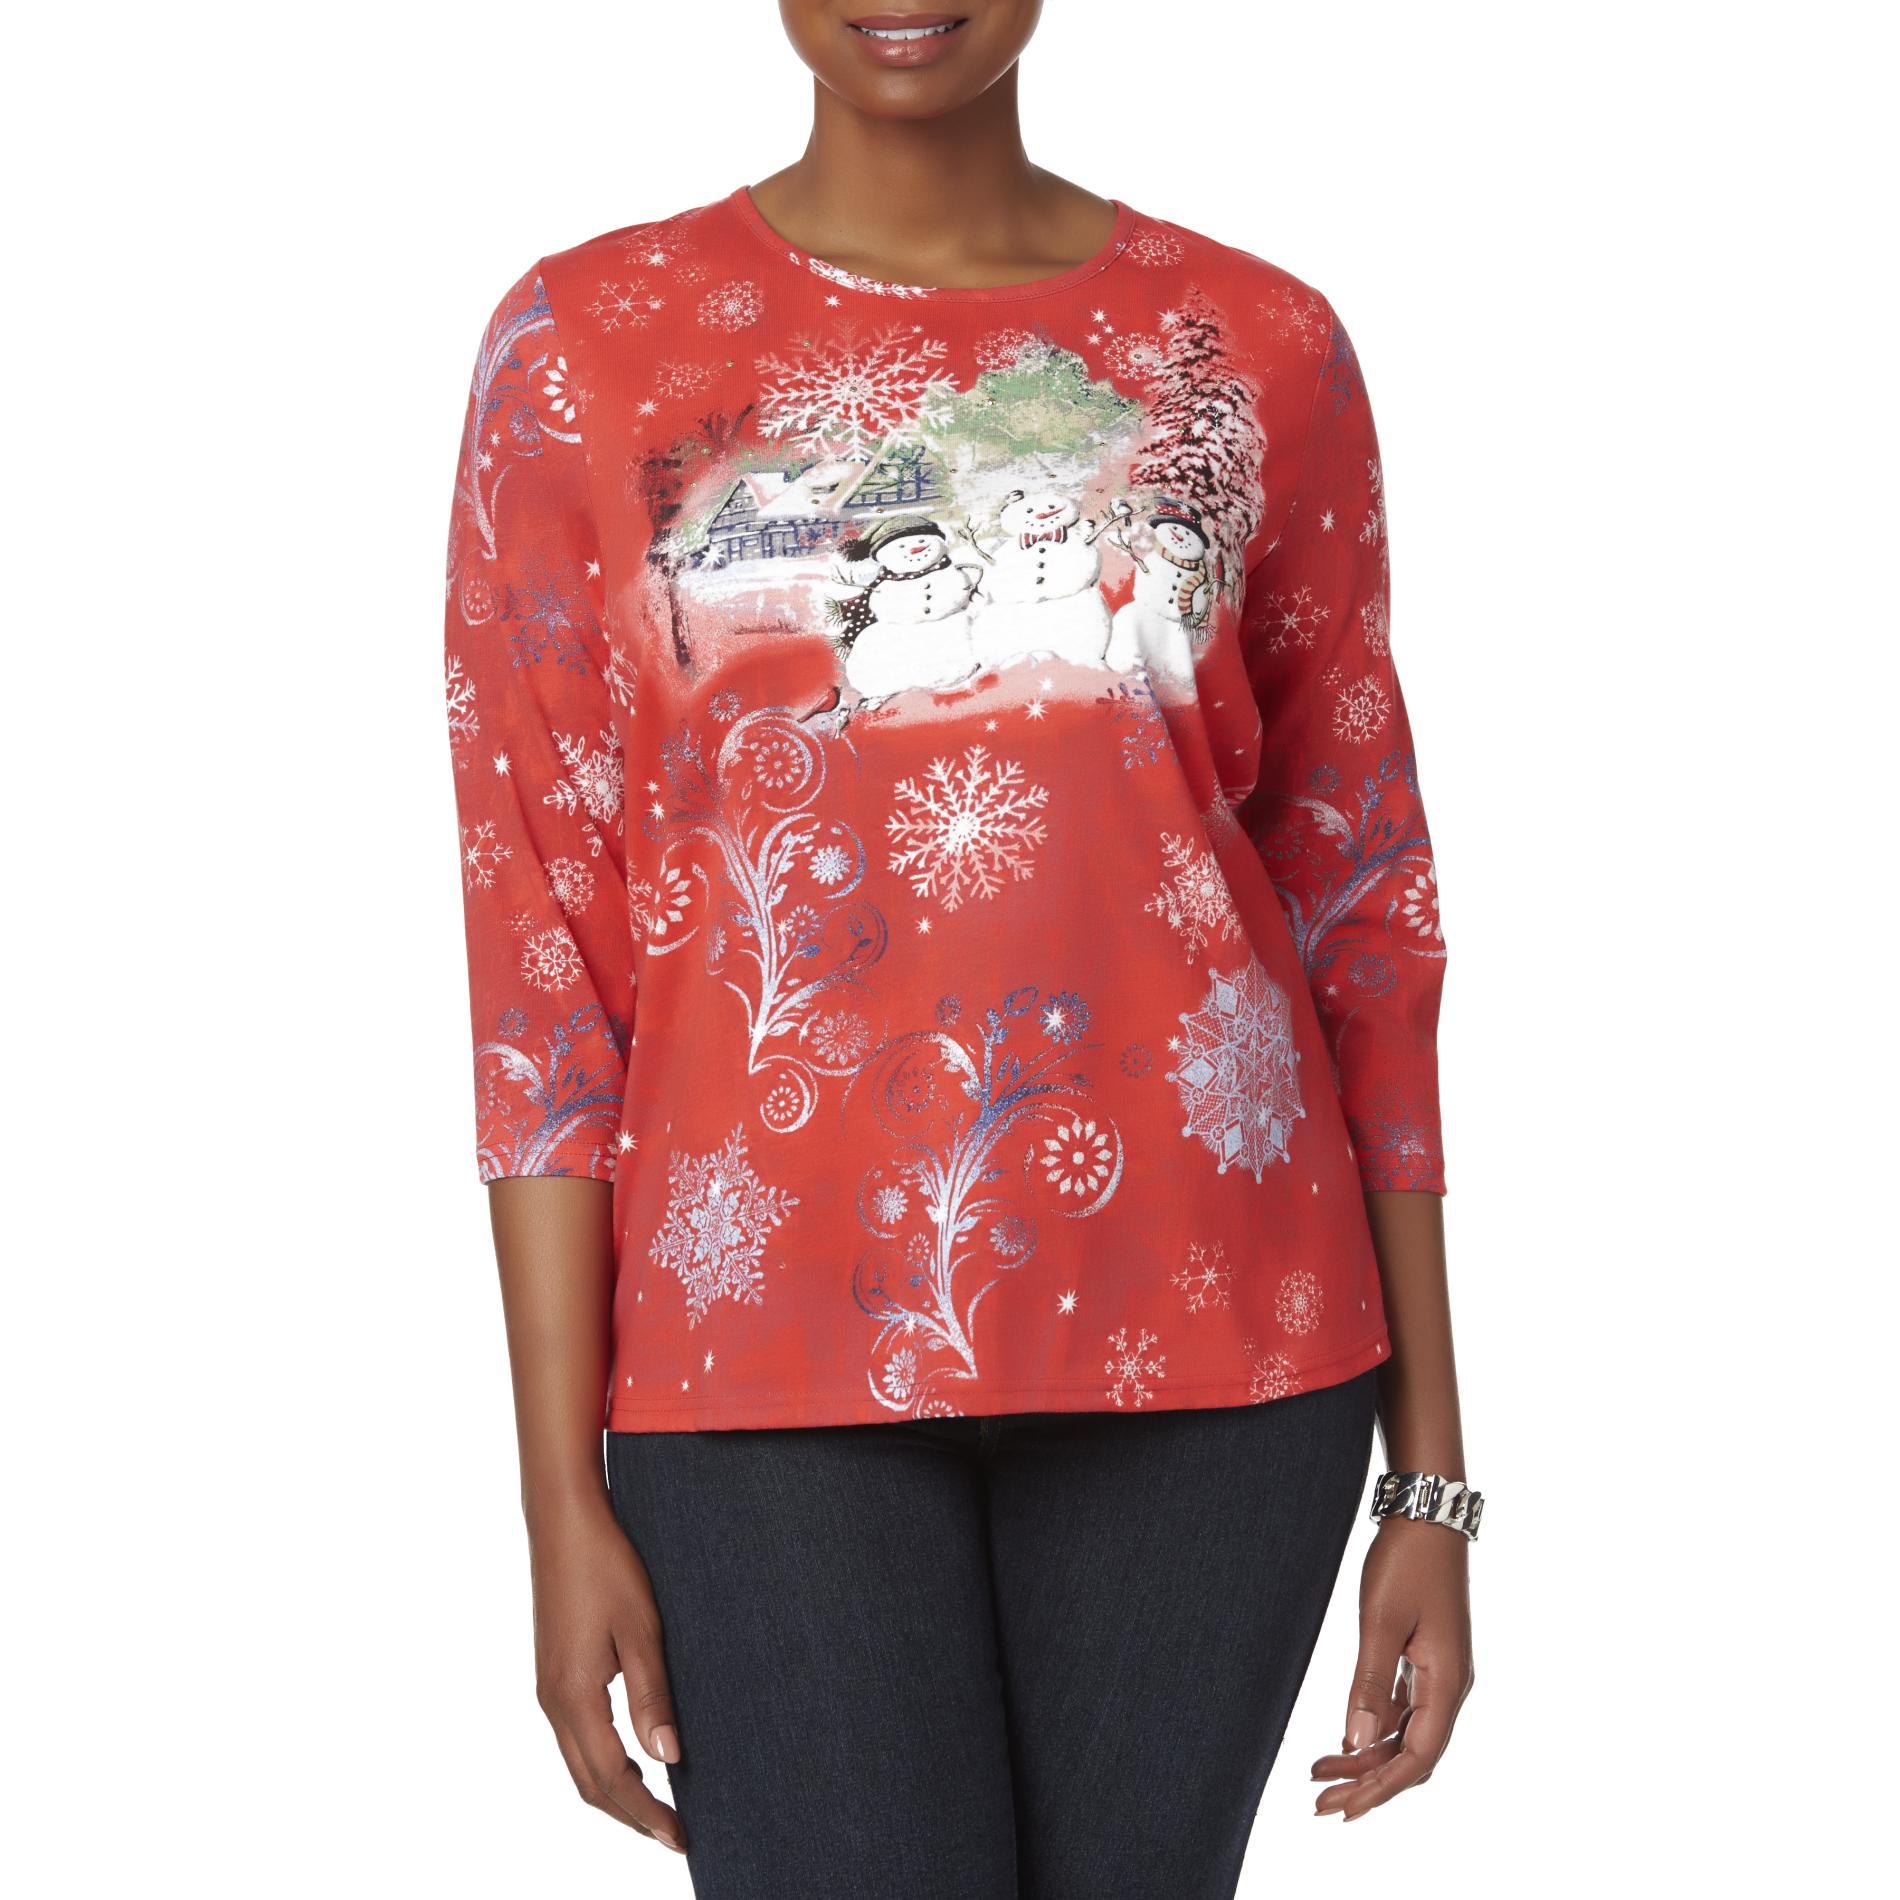 Holiday Editions Women's Plus T-Shirt - Snowman